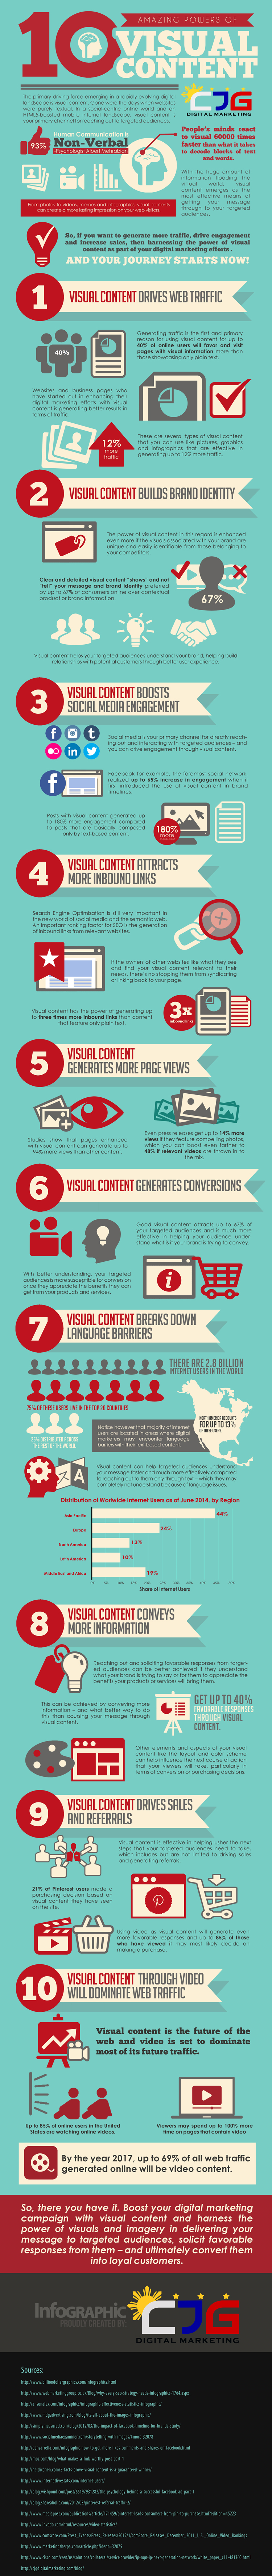 10 Amazing Powers of Visual Content (Infographic) - An Infographic from CJG Digital Marketing